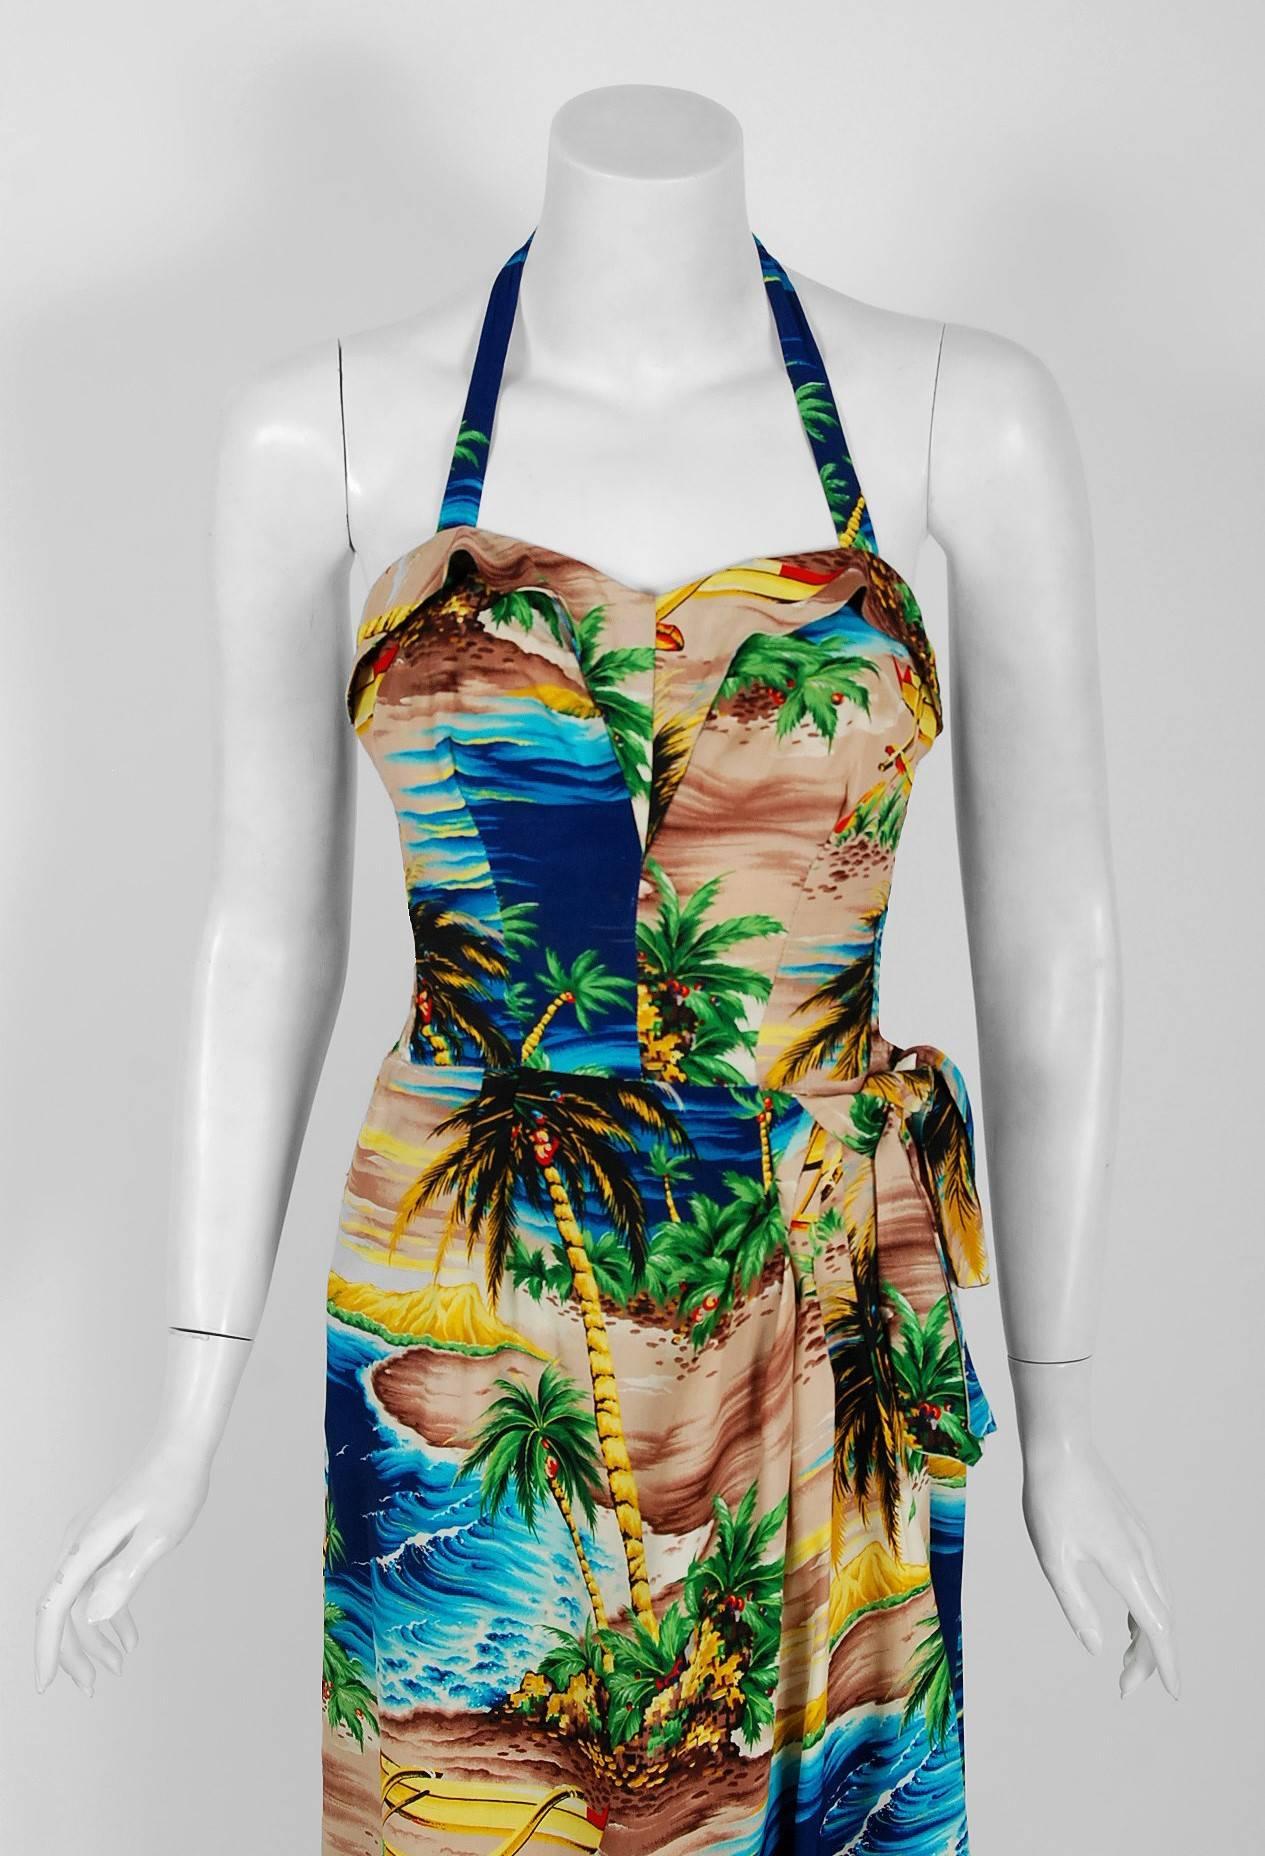 Breathtaking 1940's Hale Hawaii silk sarong ensemble fashioned in a gorgeous and vivid multi-colored tropical ocean scenic print. Just look at those colors! Along side designers such as Alfred Shaheen, this brand pioneered Hawaii's vital garment